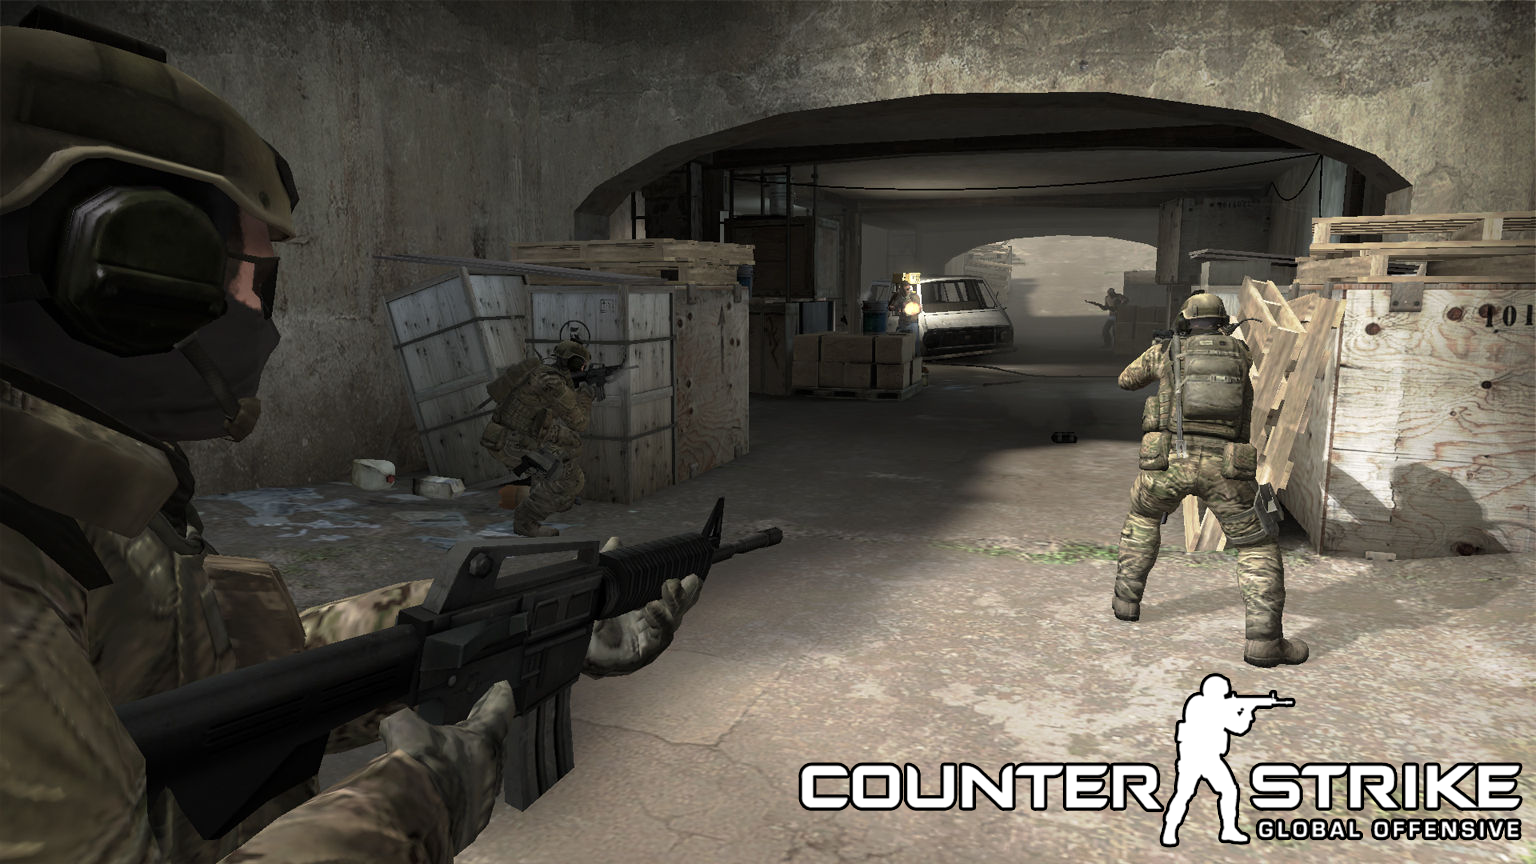 Counter Strike: Global Offensive Launches Aug 21 for Just $15